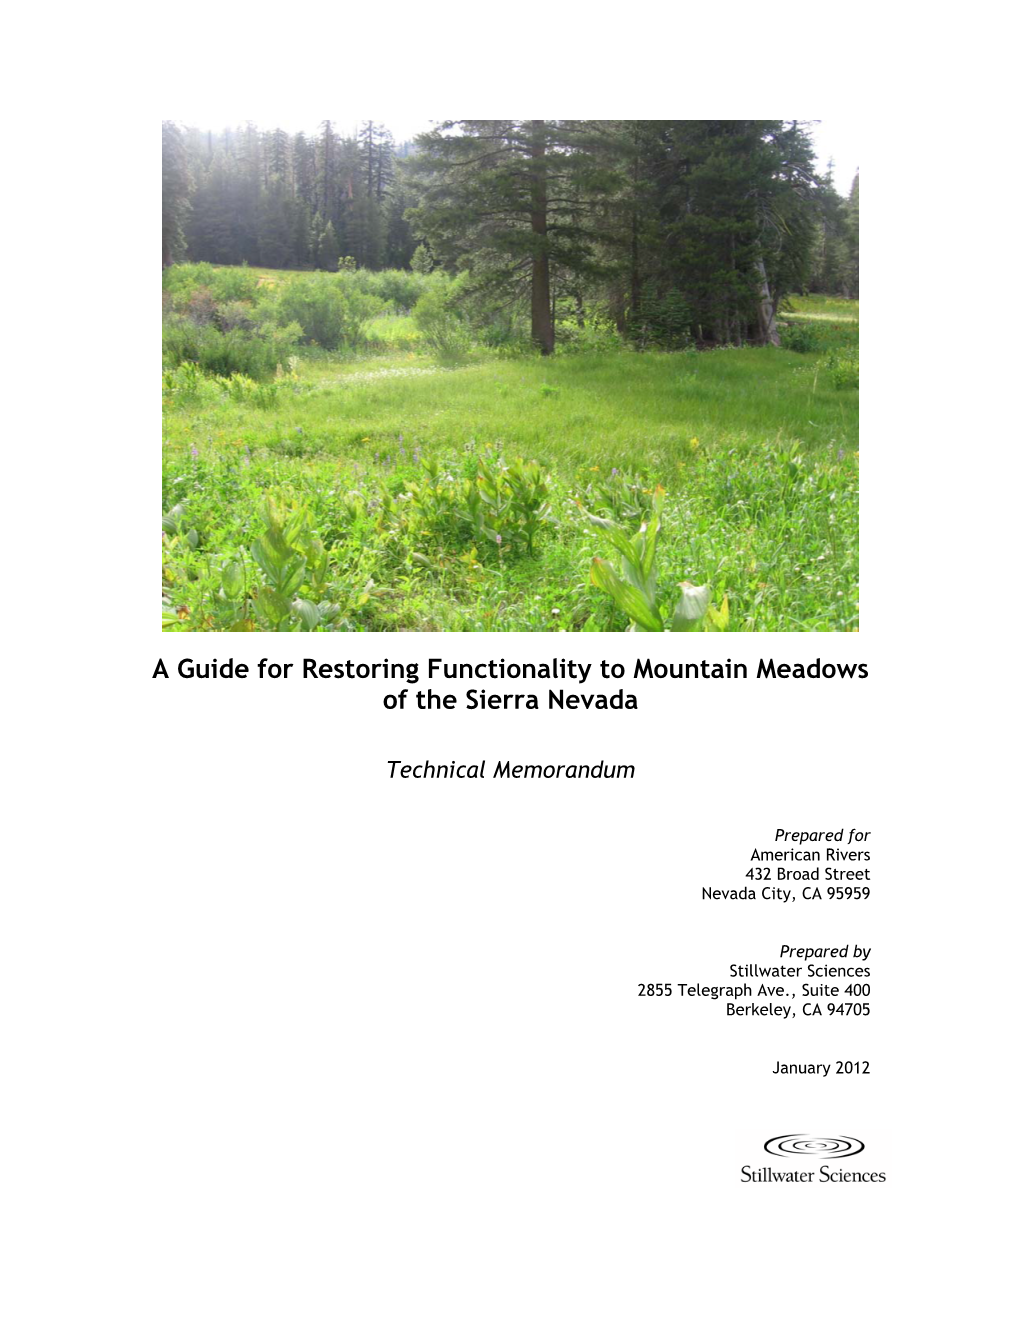 A Guide for Restoring Functionality to Mountain Meadows of the Sierra Nevada